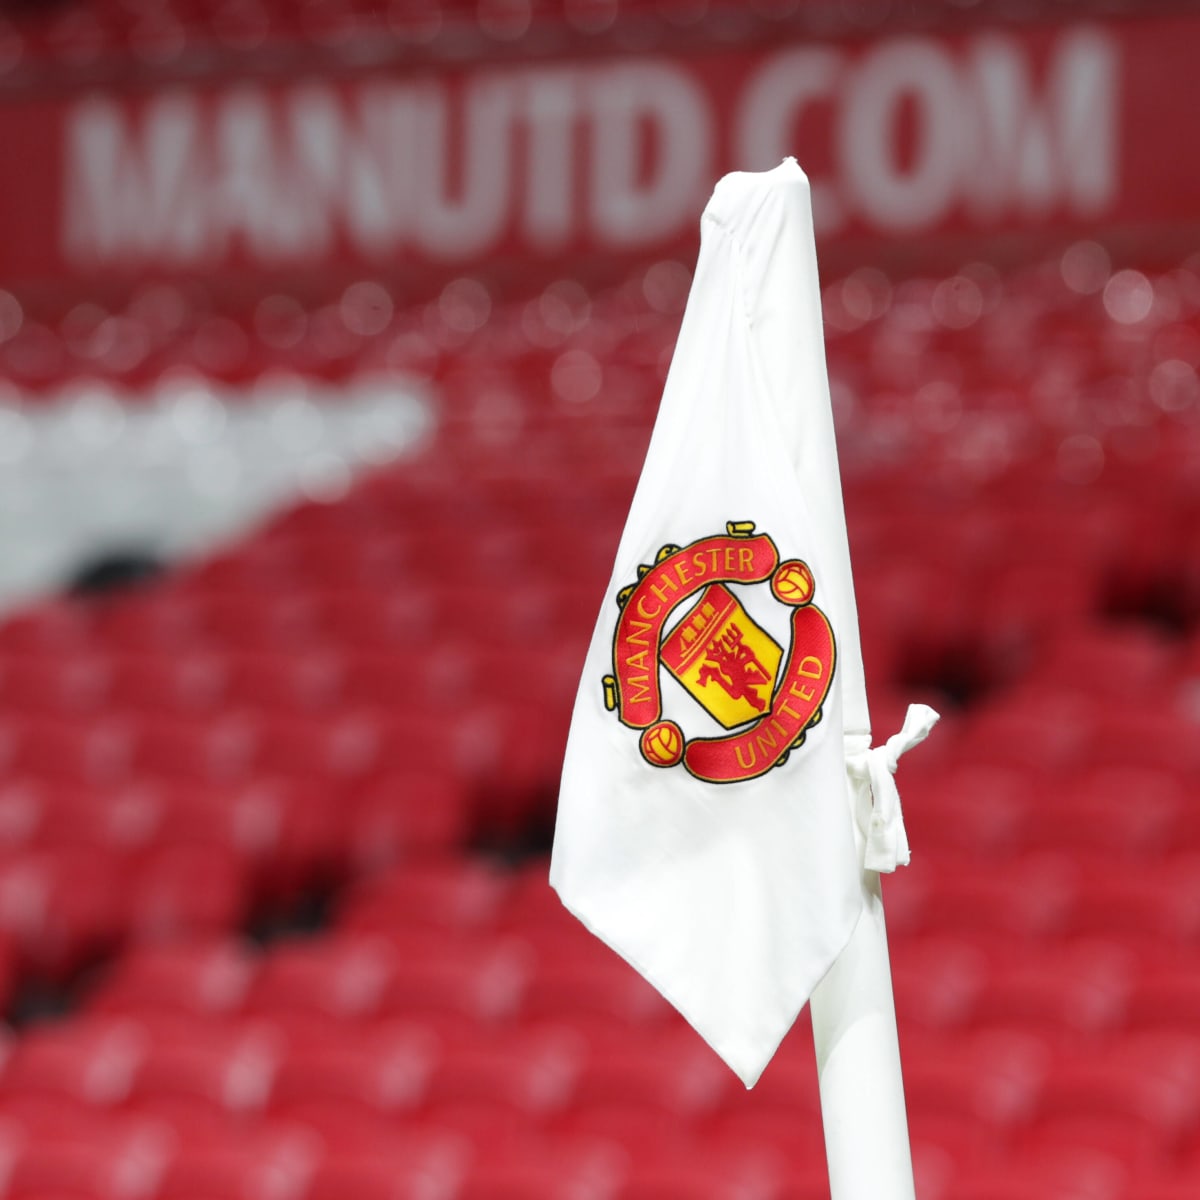 Manchester United Sale: Manchester United's owners see escape hatch in Football club deal boom